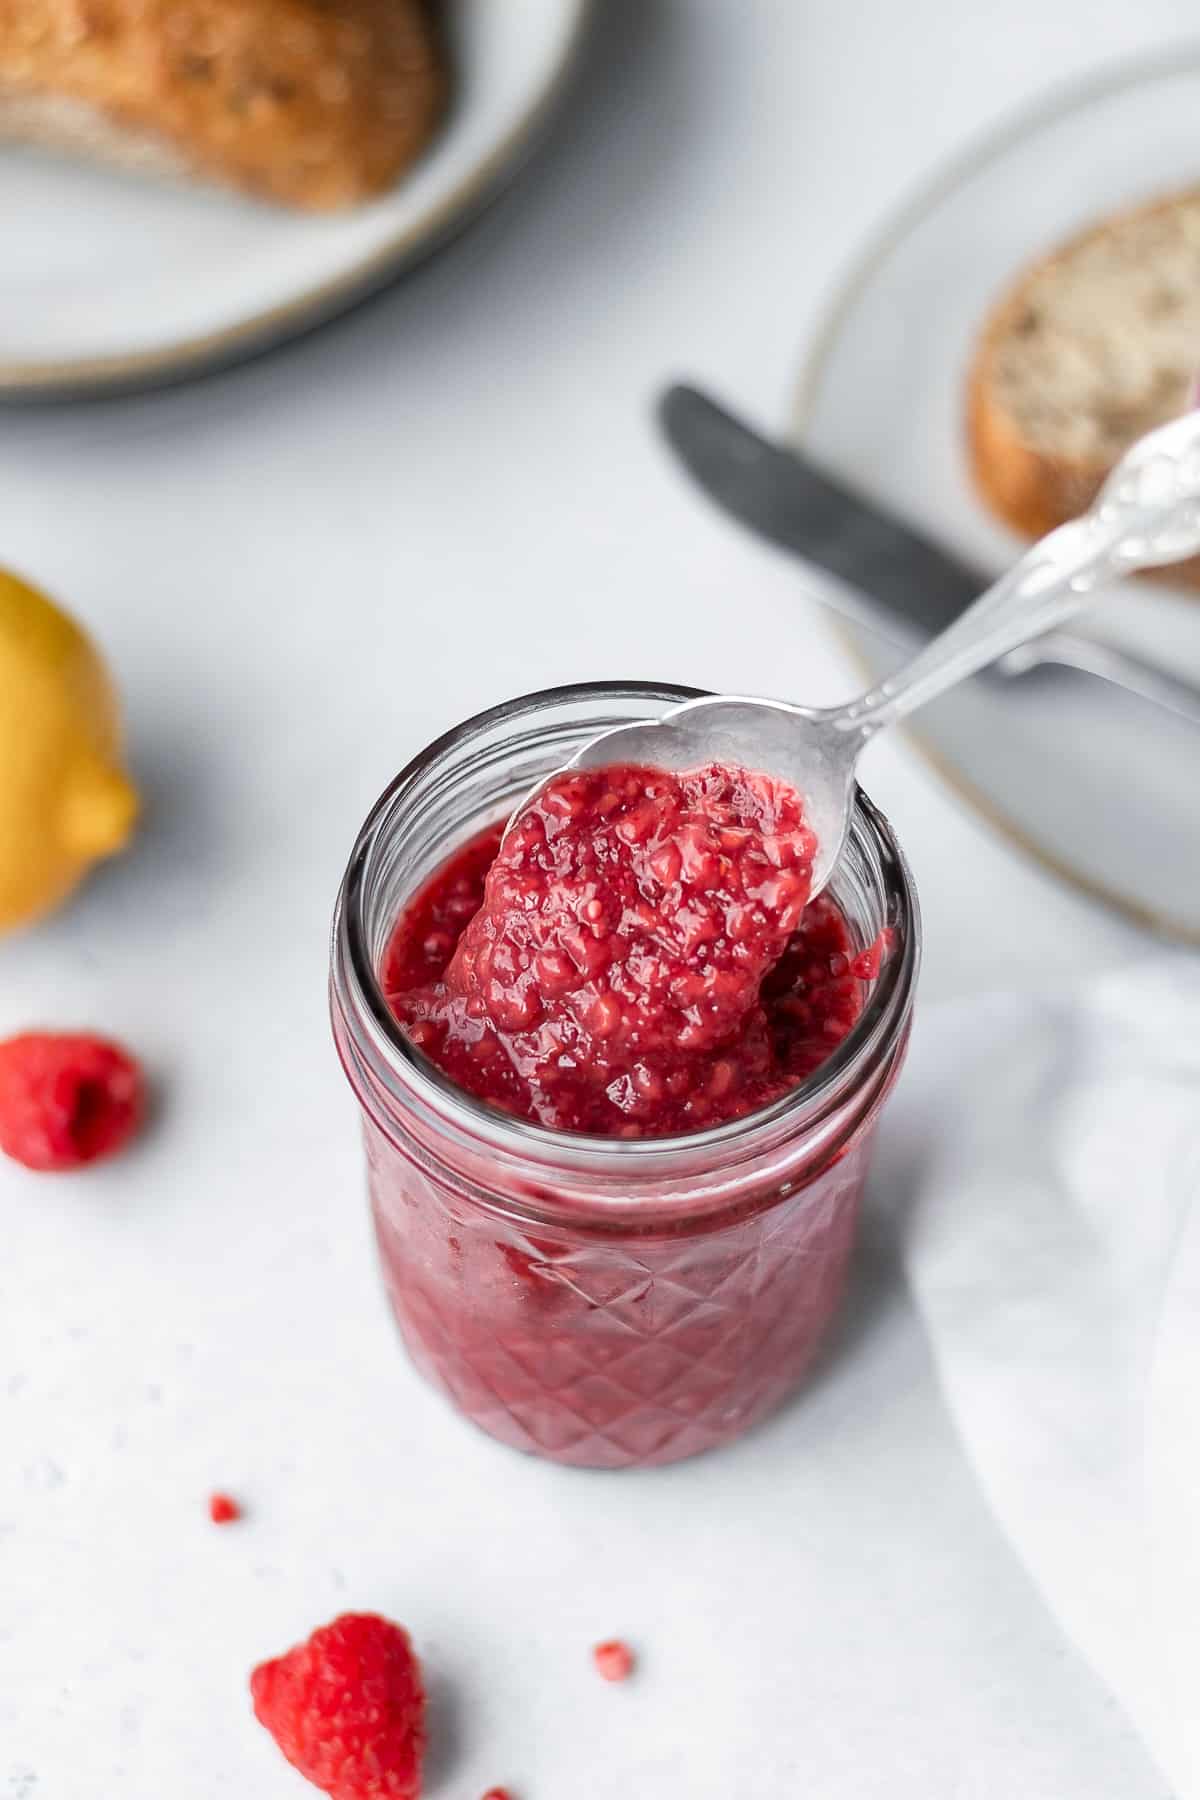 Spooning out chia seed jam from a jar with a spoon.